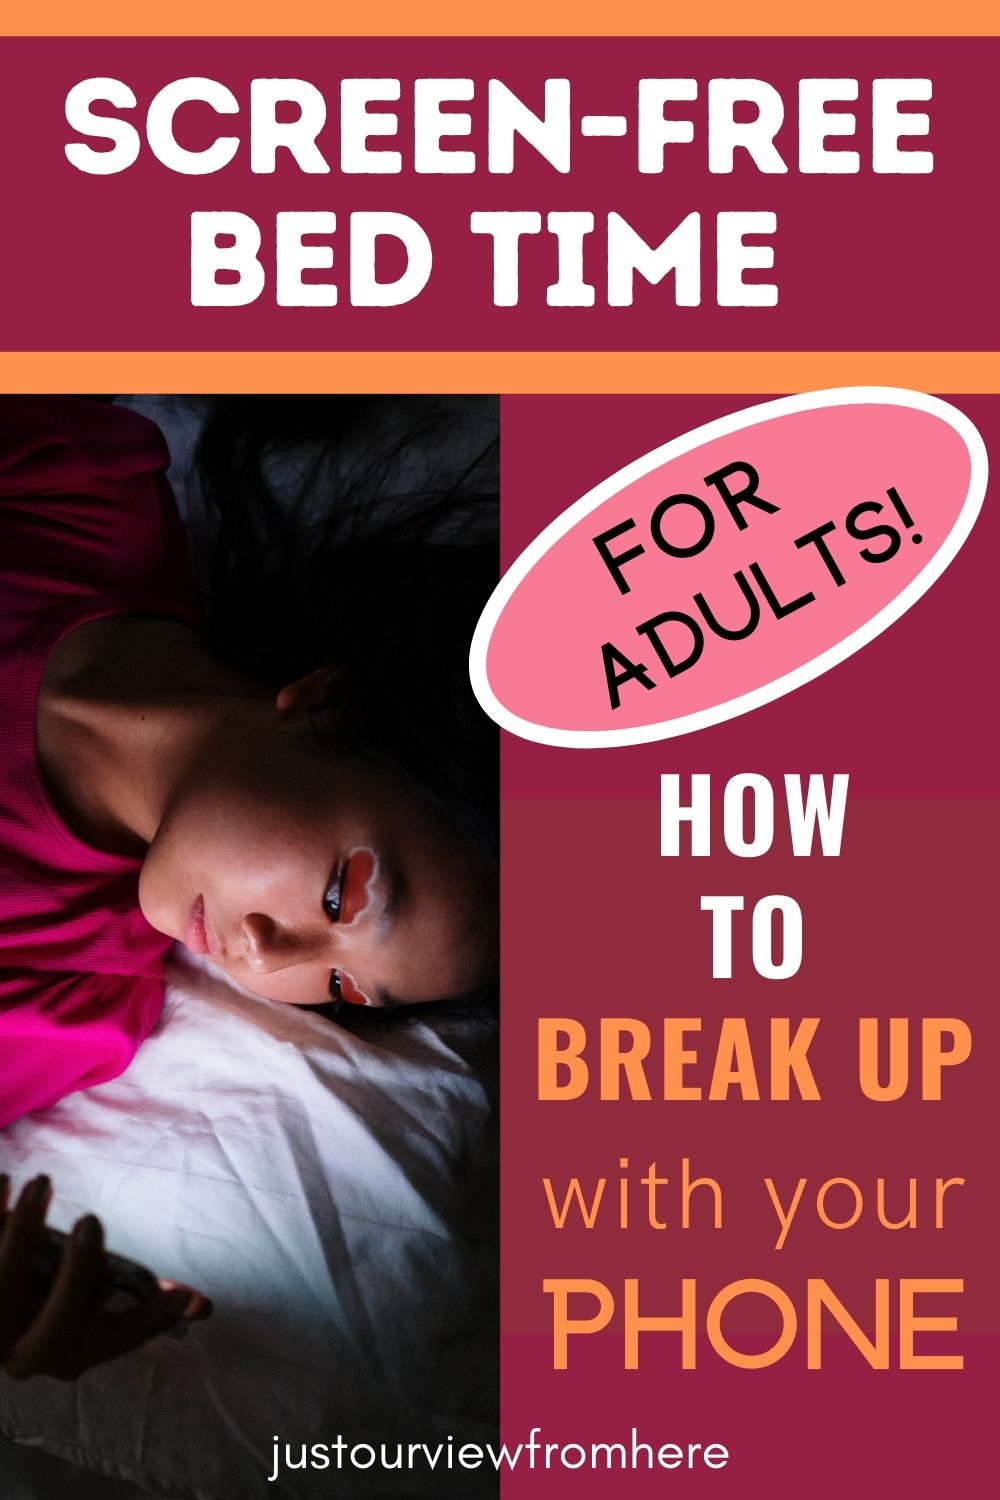 screen time before bed, text overlay screen free bedtime for adults how to break up with your phone